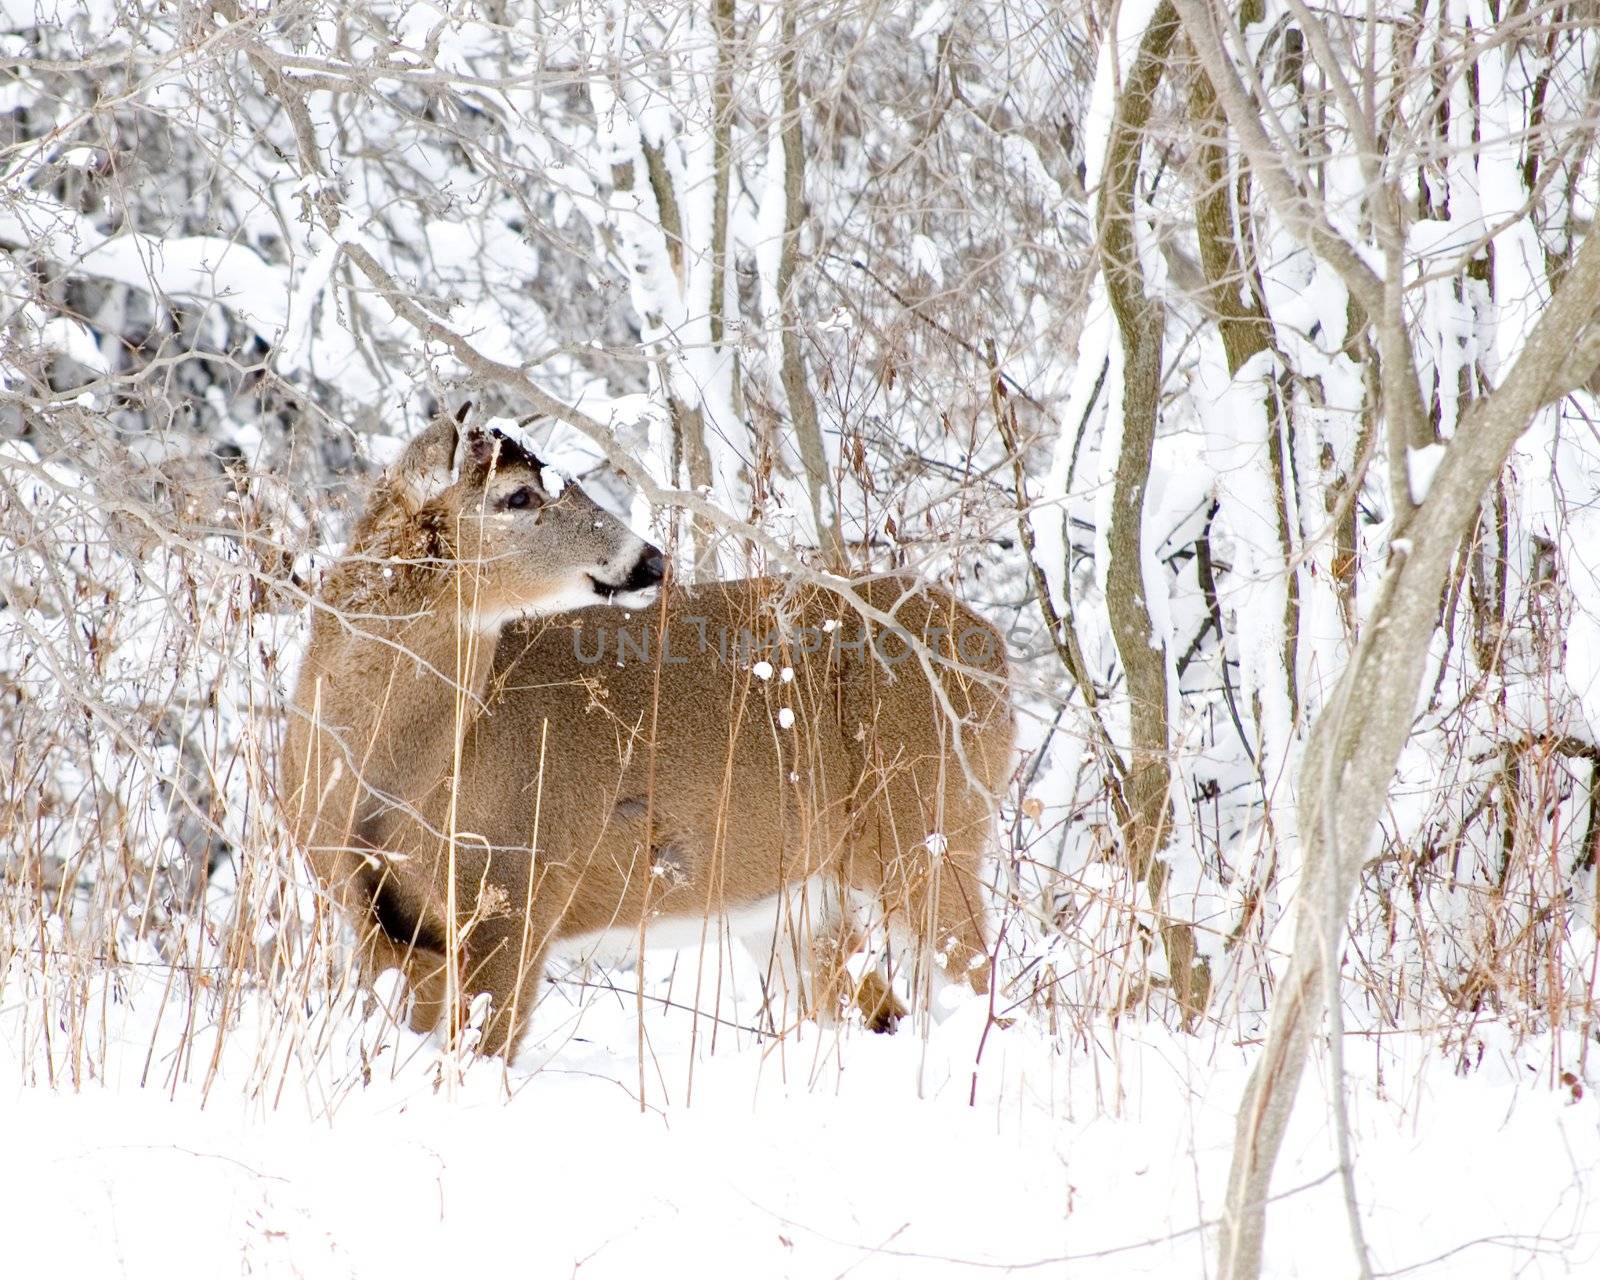 Winter Whitetail by brm1949